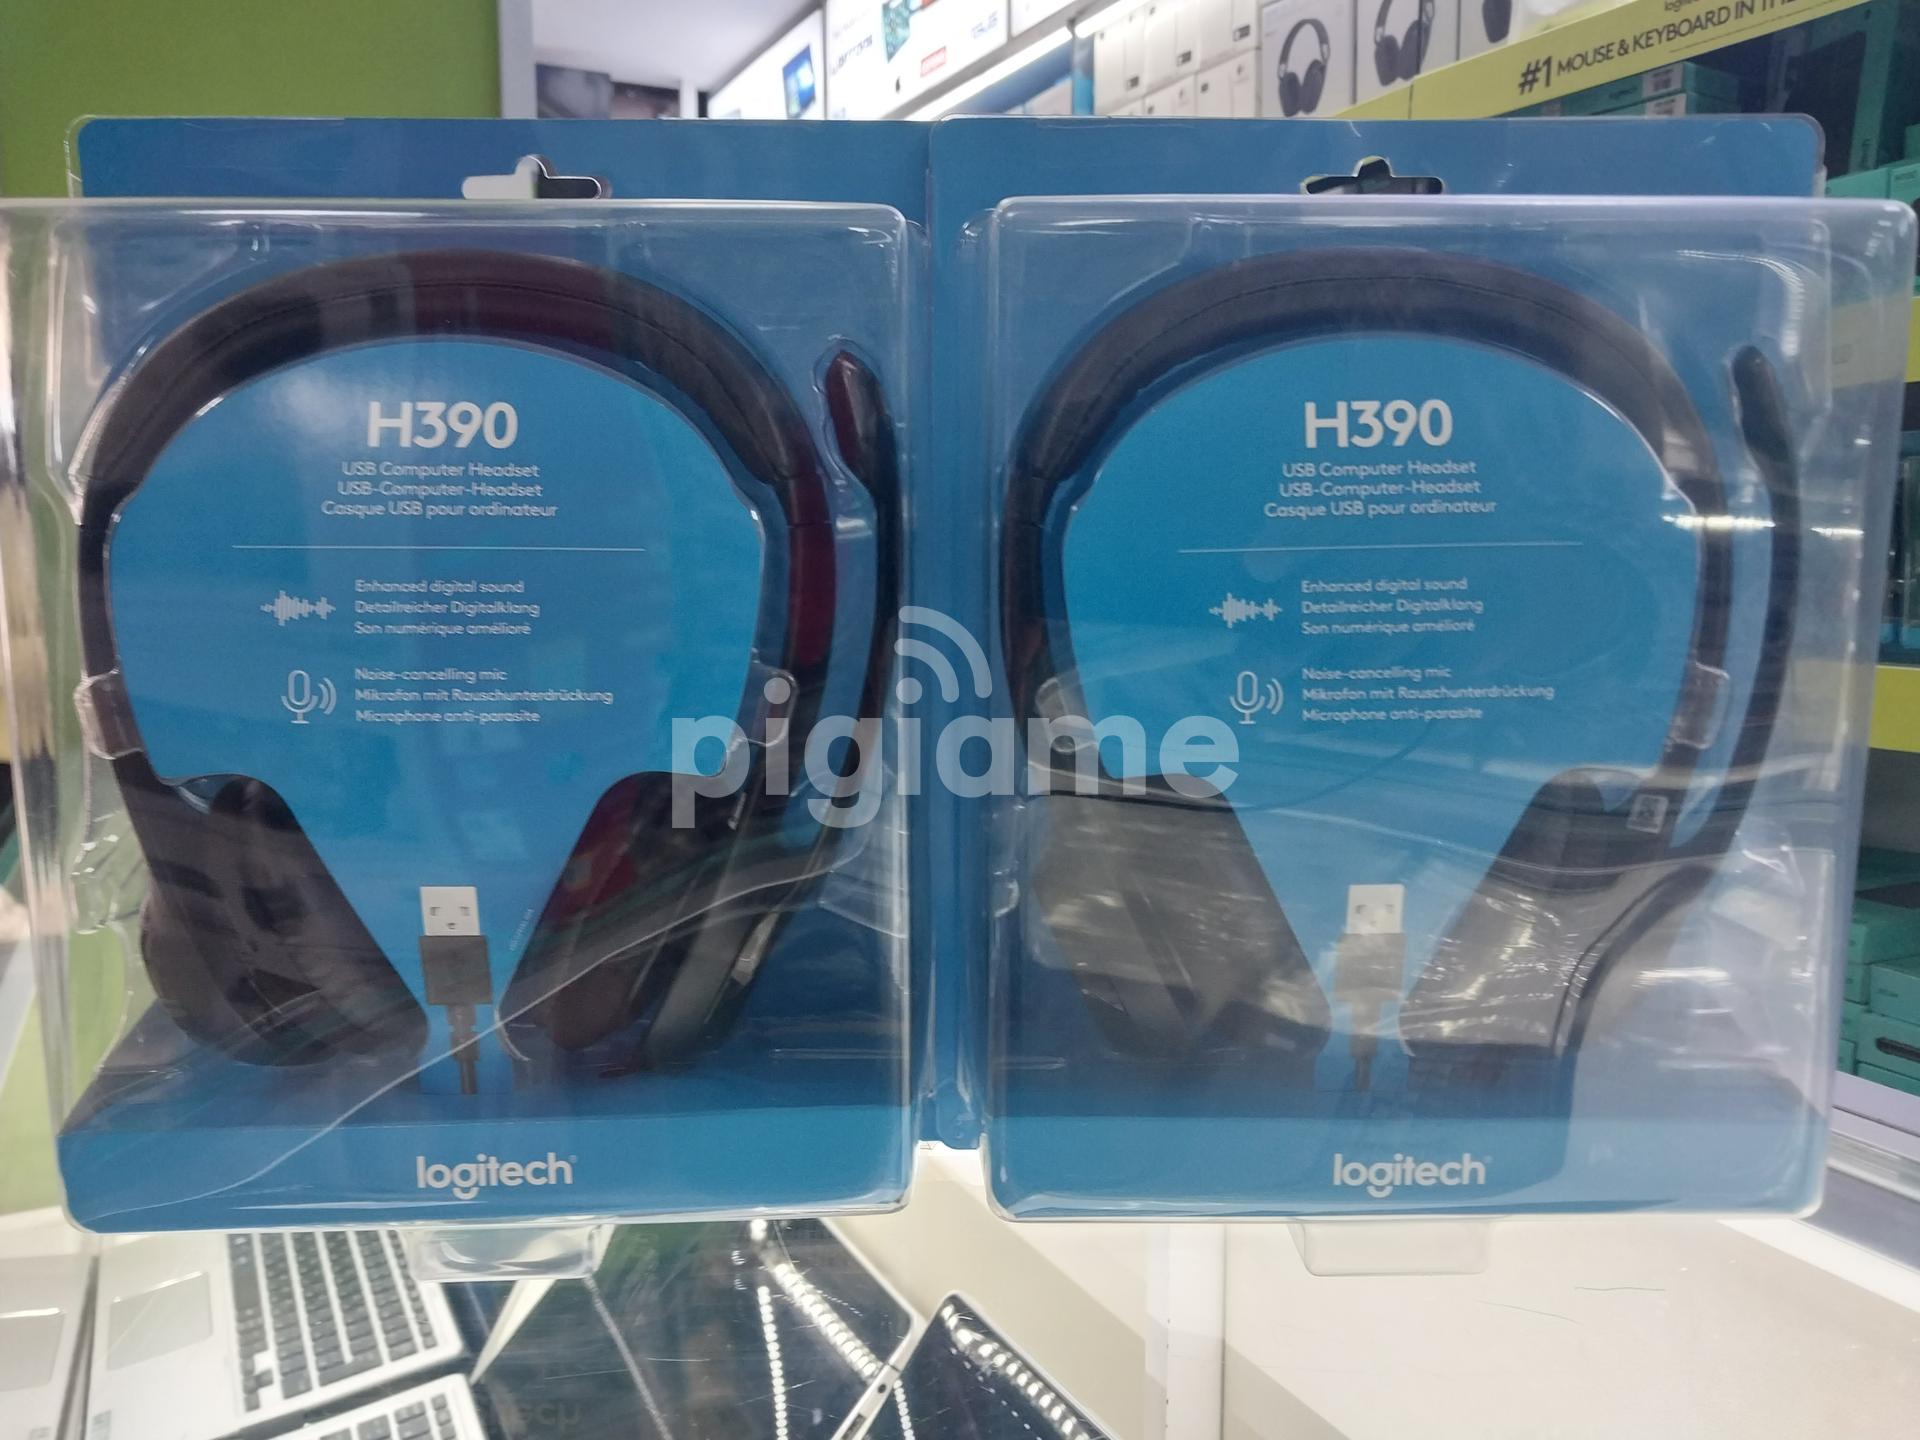 Logitech H390 USB Computer Headset with Noise Cancelling Mic in